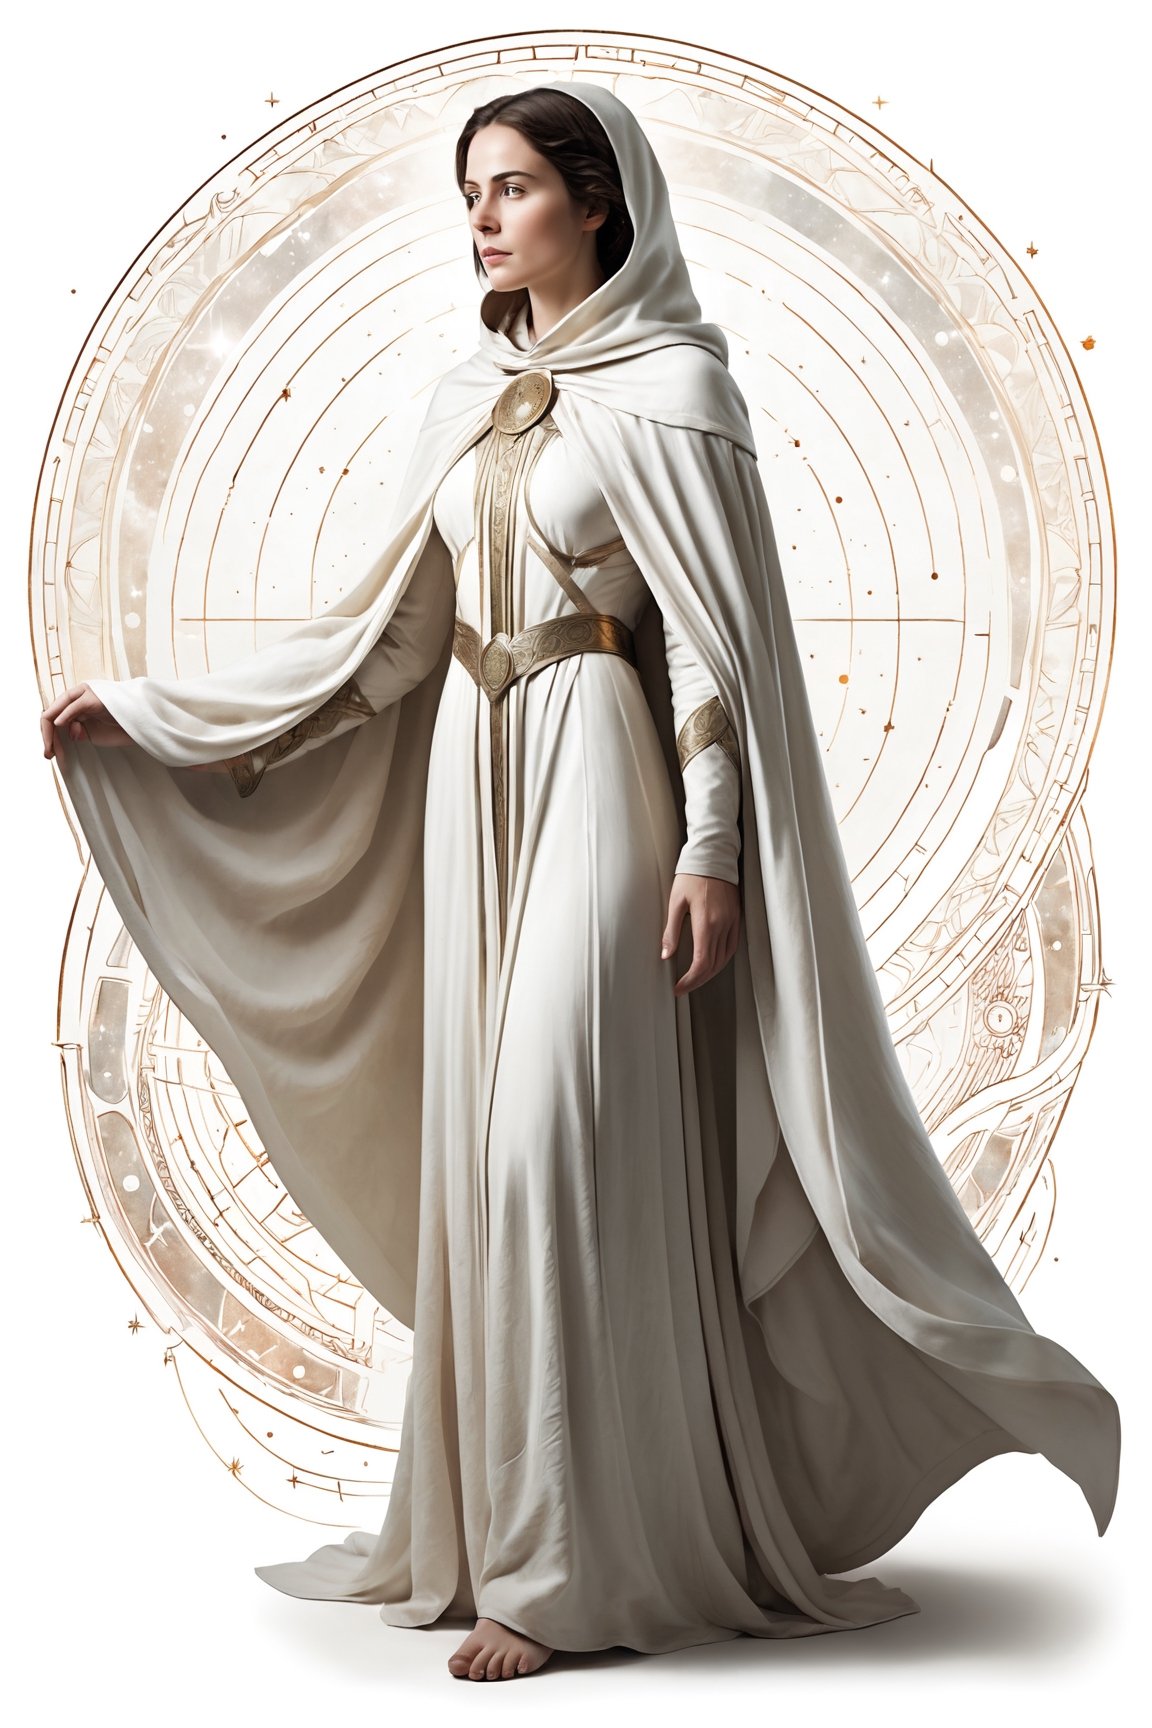 Create an image in a style of ancient engraving illustration, the composition showcases a full-body, distinctly feminine figure, facing forward, against a solid white background. She is elegantly draped in a white cloak, with her face obscured. Her right arm is distinctly raised, pulling back the cloak to dramatically reveal the universe beneath, showcasing stars and celestial wonders. The entire figure, from head to toe, is visible without being cut off, focusing on the asymmetrical reveal of the universe beneath the cloak and celestial wonders